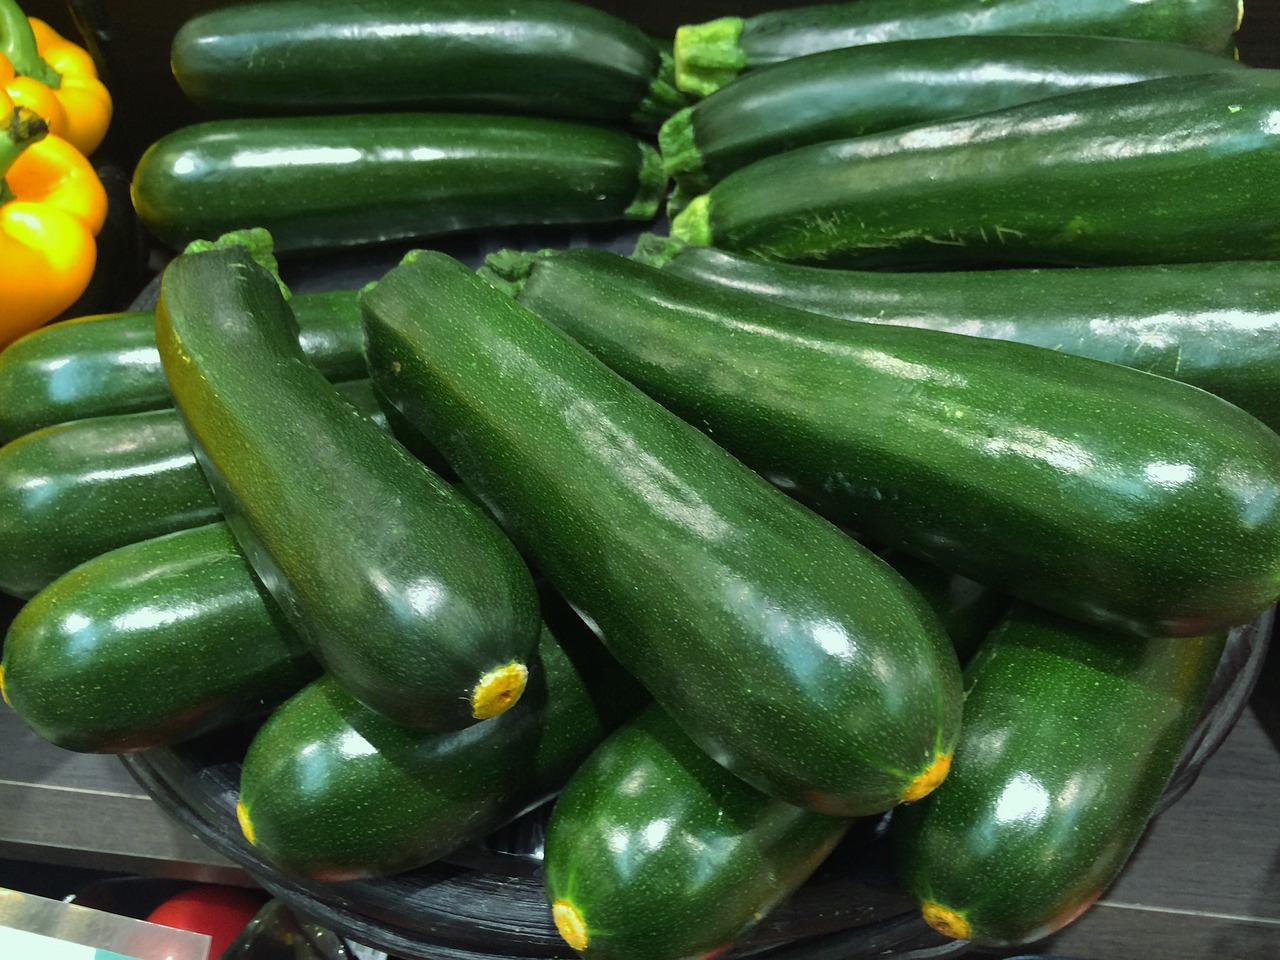 Zucchini - Ways to Spice and Prepare This Prolific Garden Vegetable